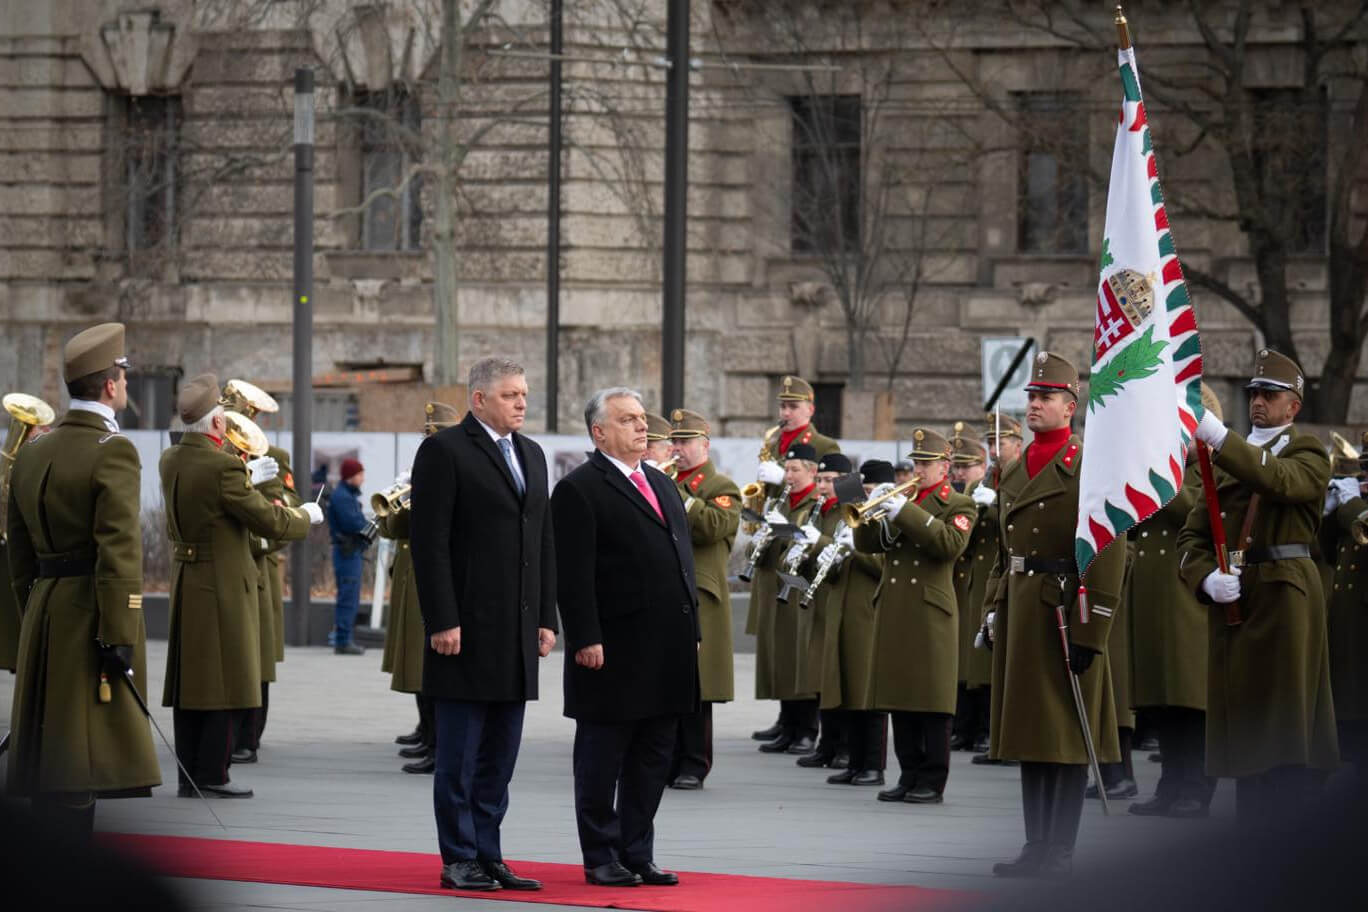 Relations at High Point Between Hungary & Slovakia, Says Orbán